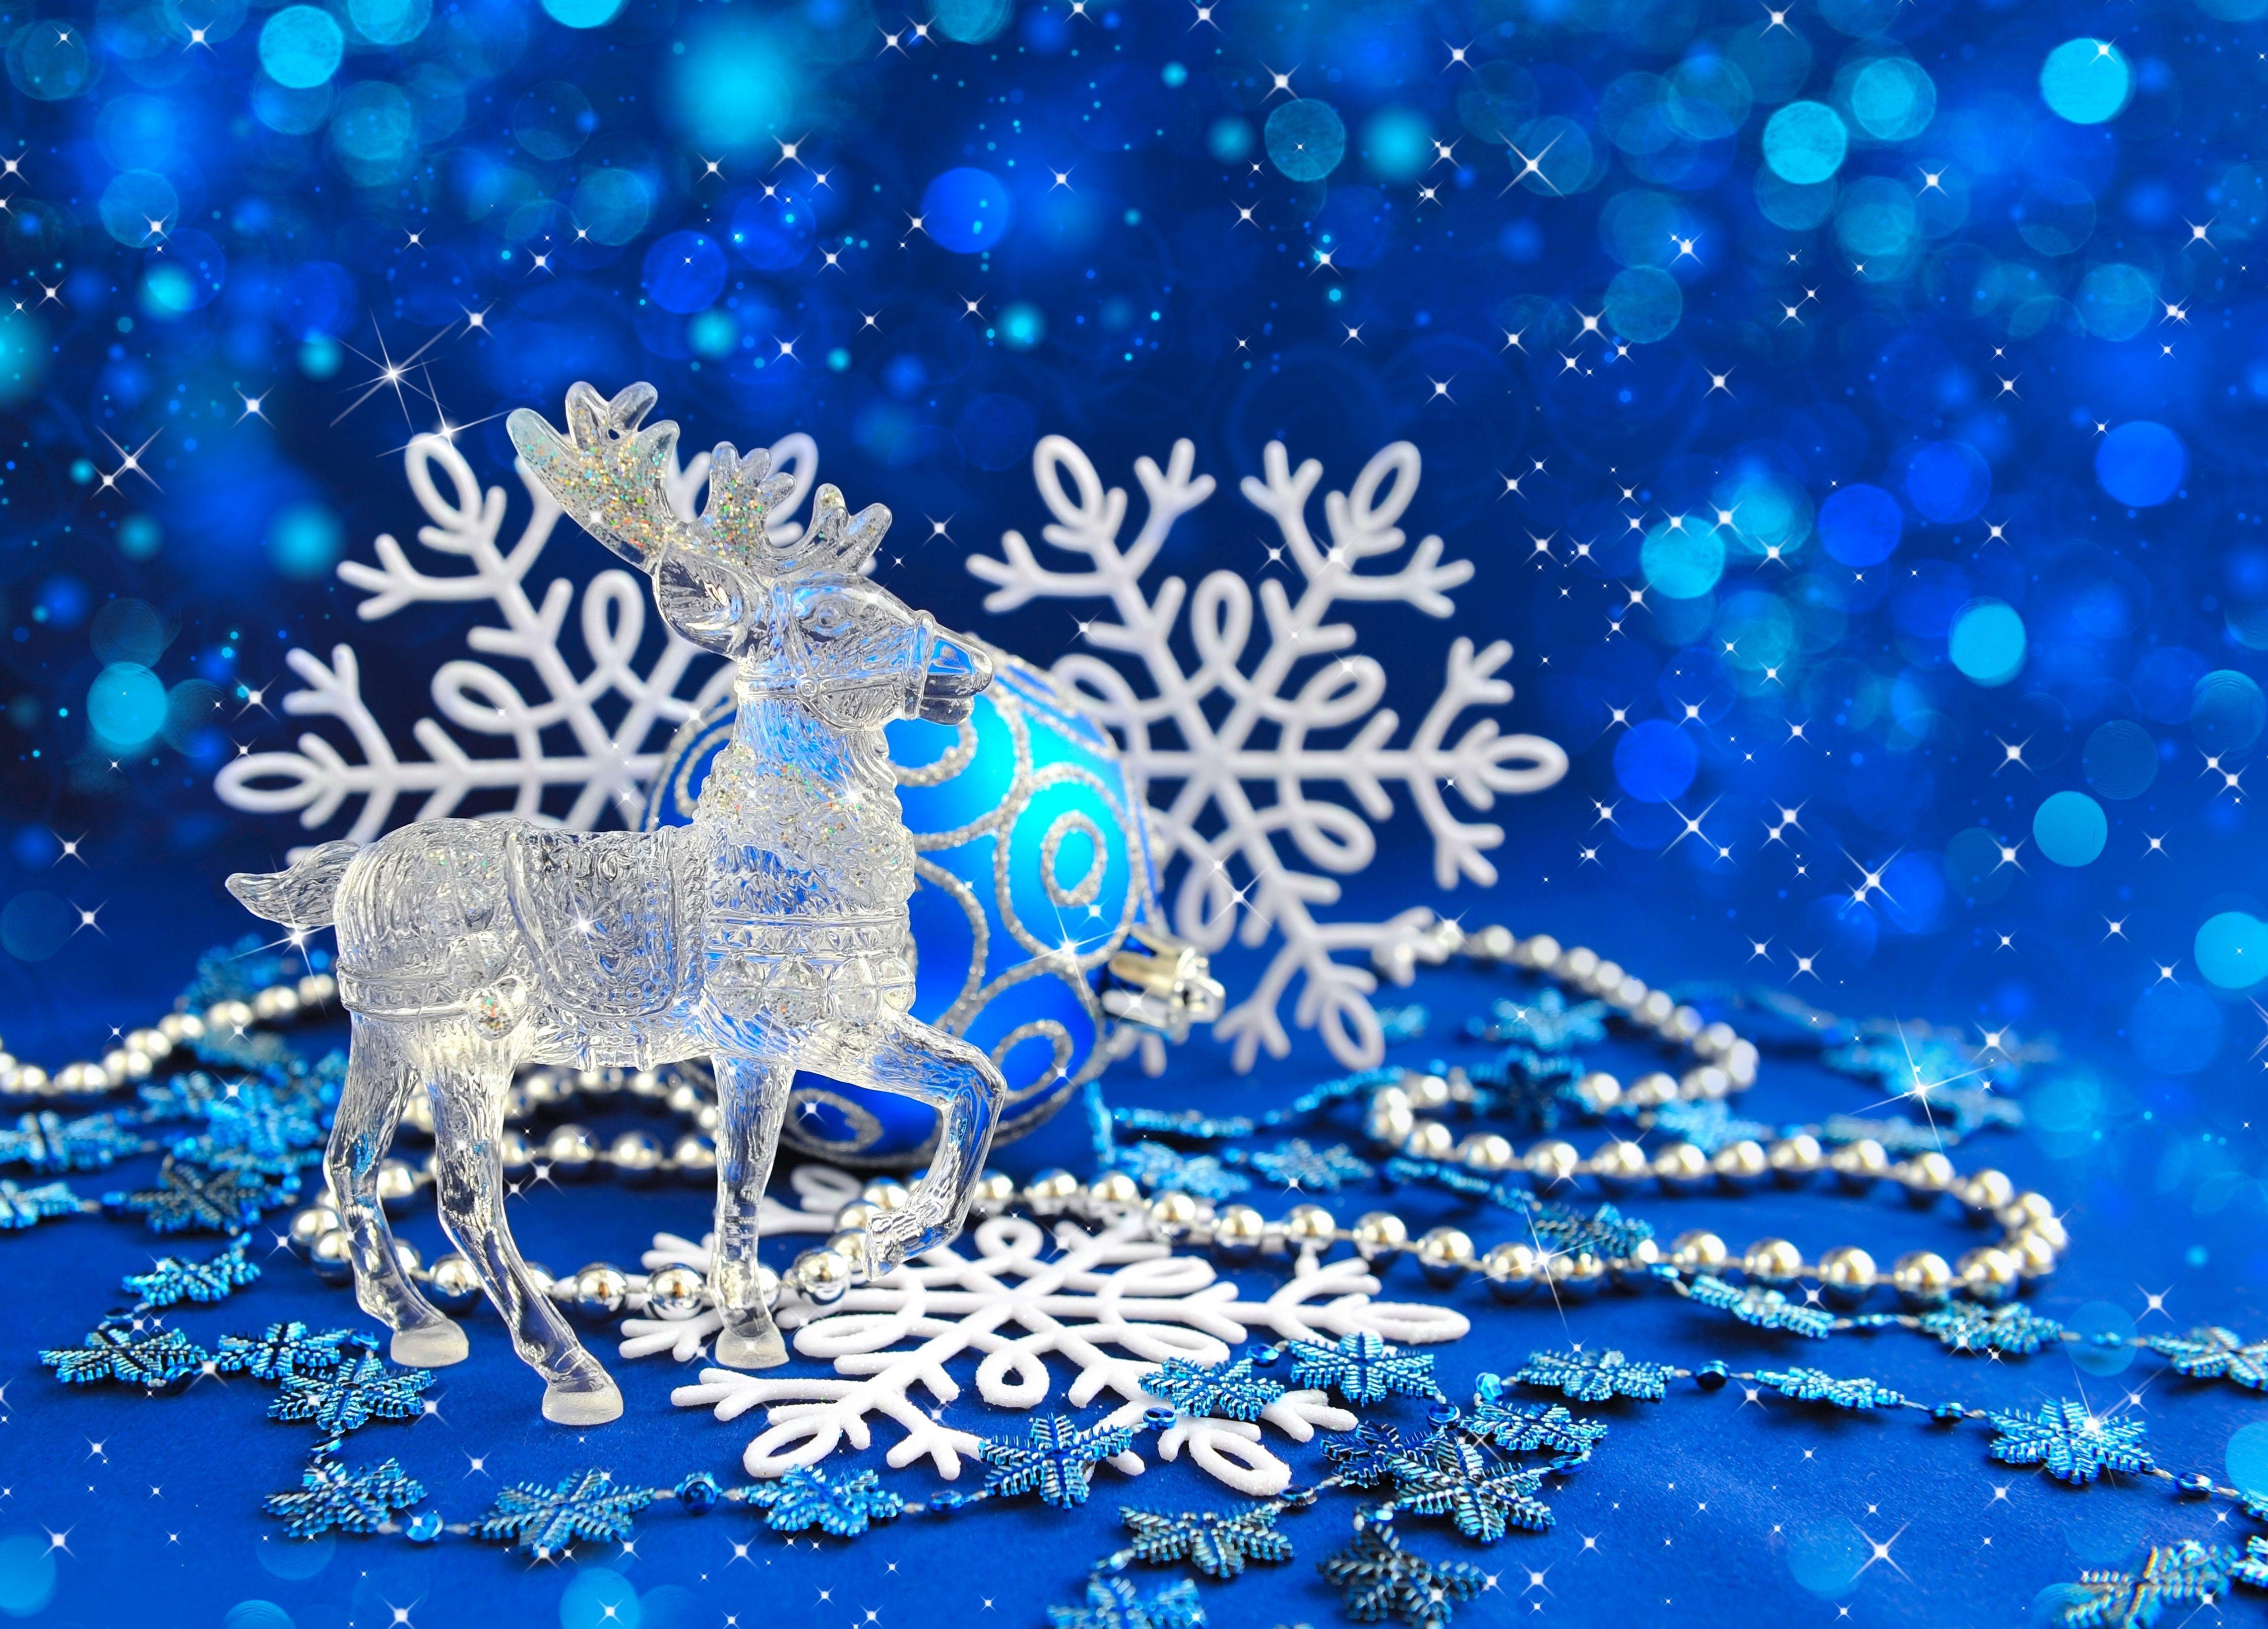 Crystal, Blue, and White Christmas Ornaments 4k Ultra HD